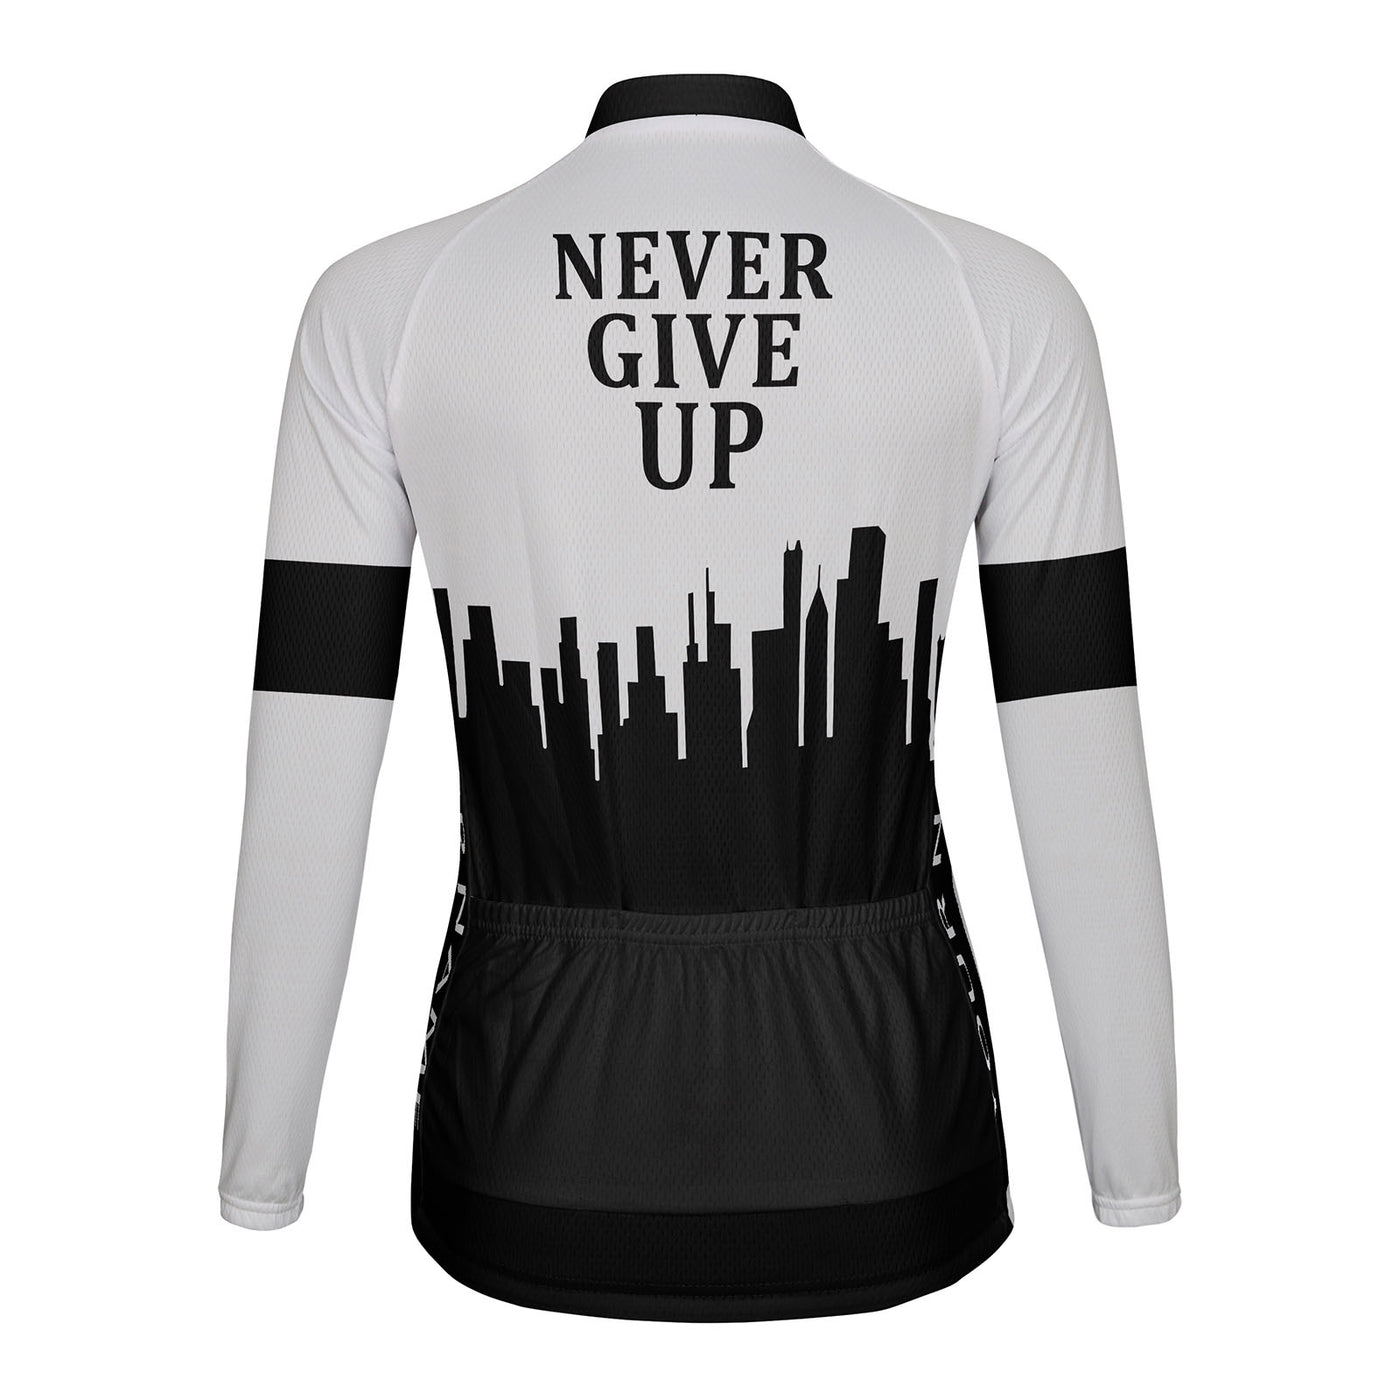 Customized Never Give Up Women's Thermal Fleece Cycling Jersey Long Sleeve